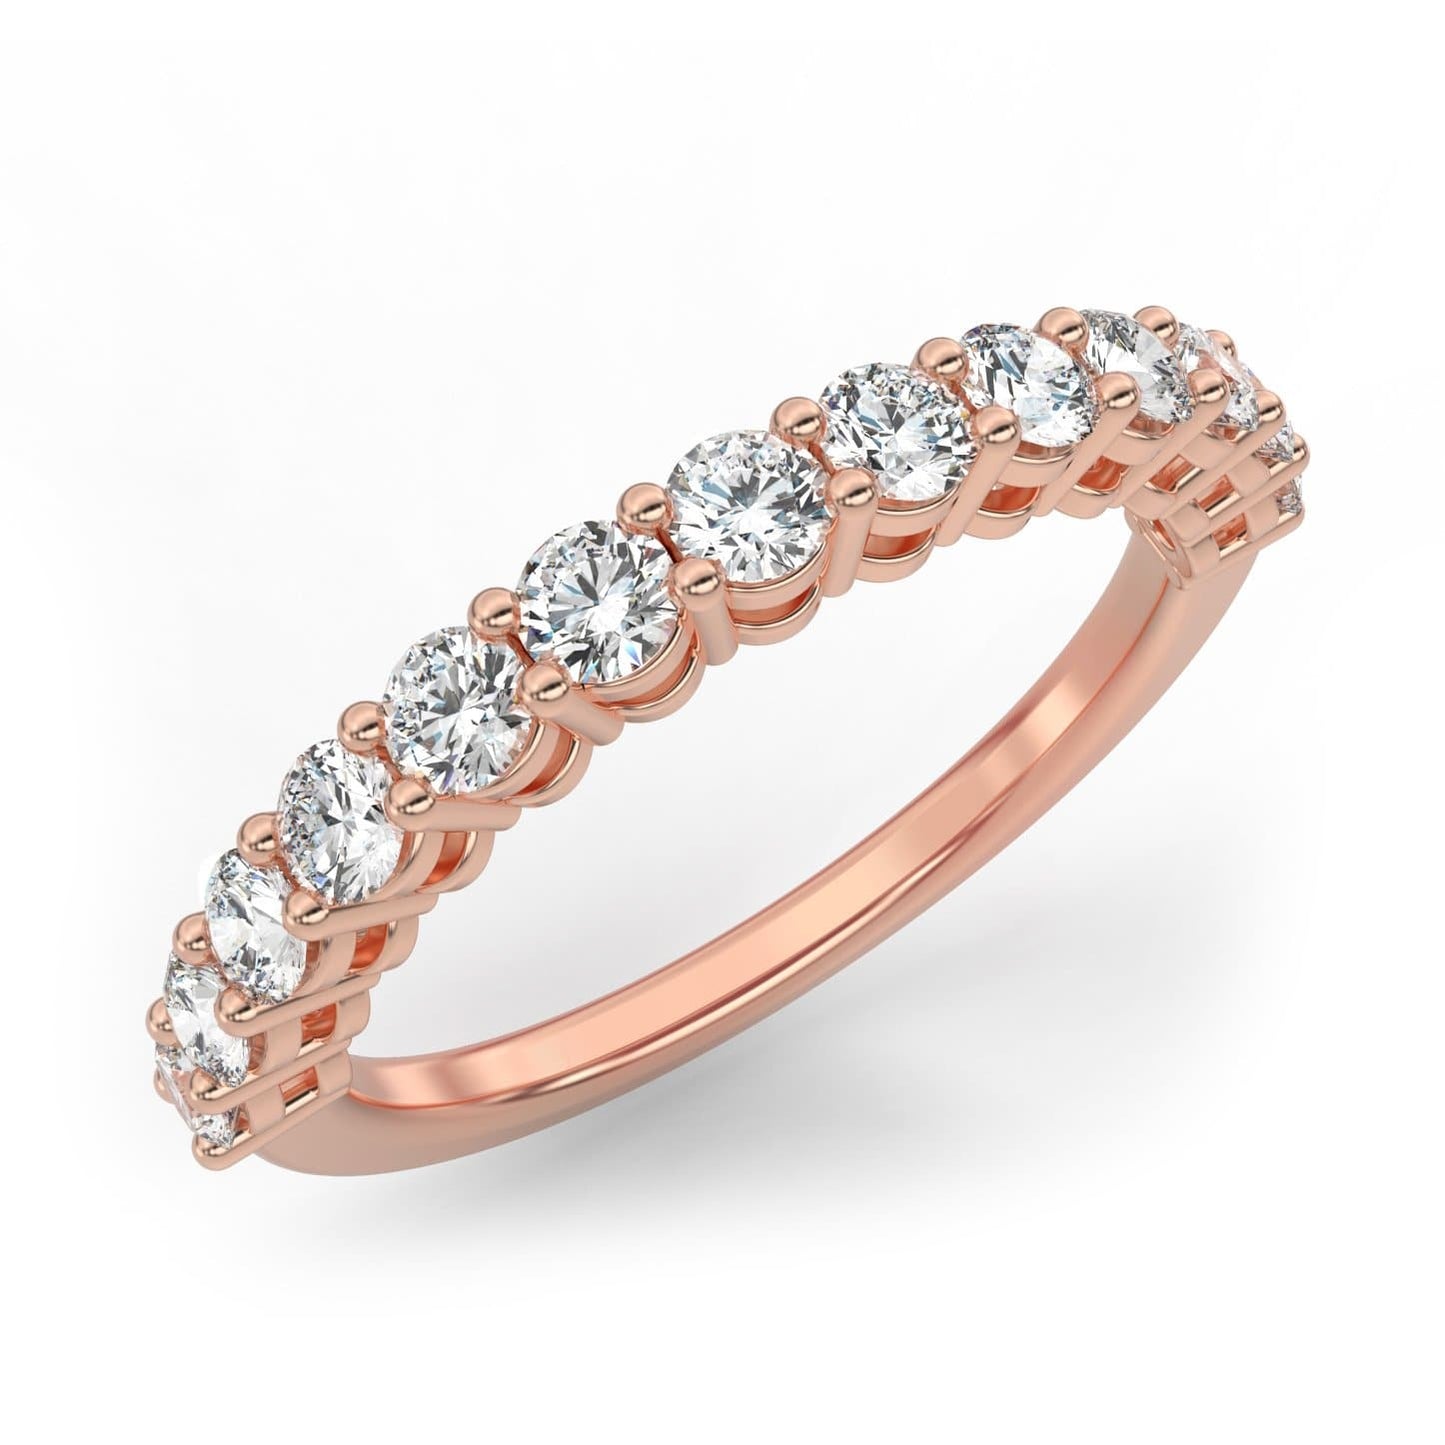 1ct Basket Prong Semi-Eternity Ring in 14k Gold